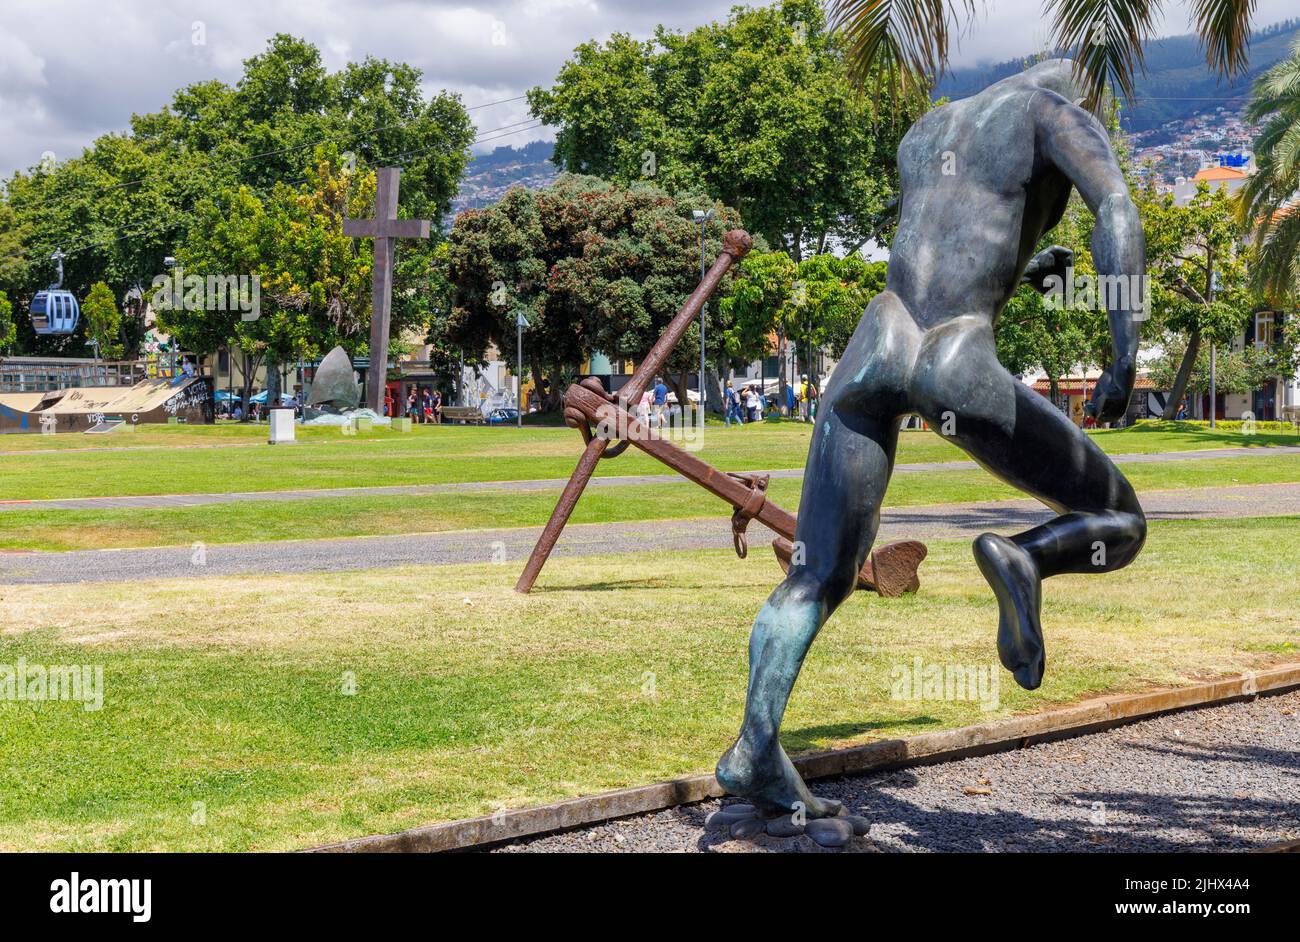 Statue of running man, Funchal, Madeira, Portugal Stock Photo